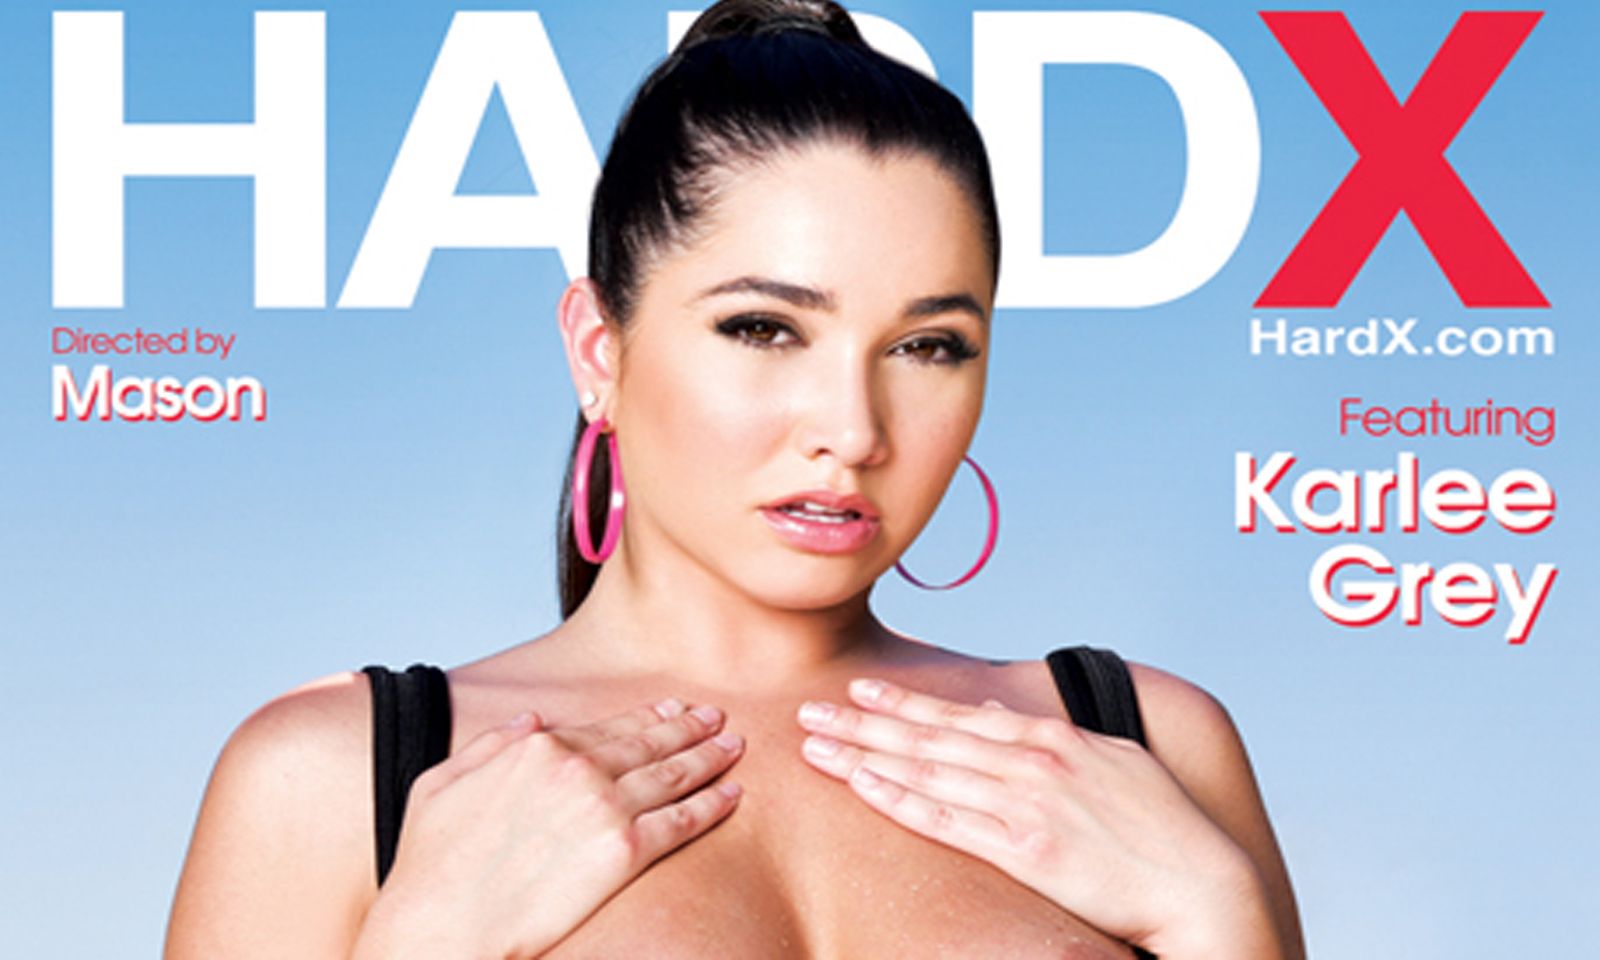 Karlee Grey is 'Stacked' Cover Model in Latest Series Installment